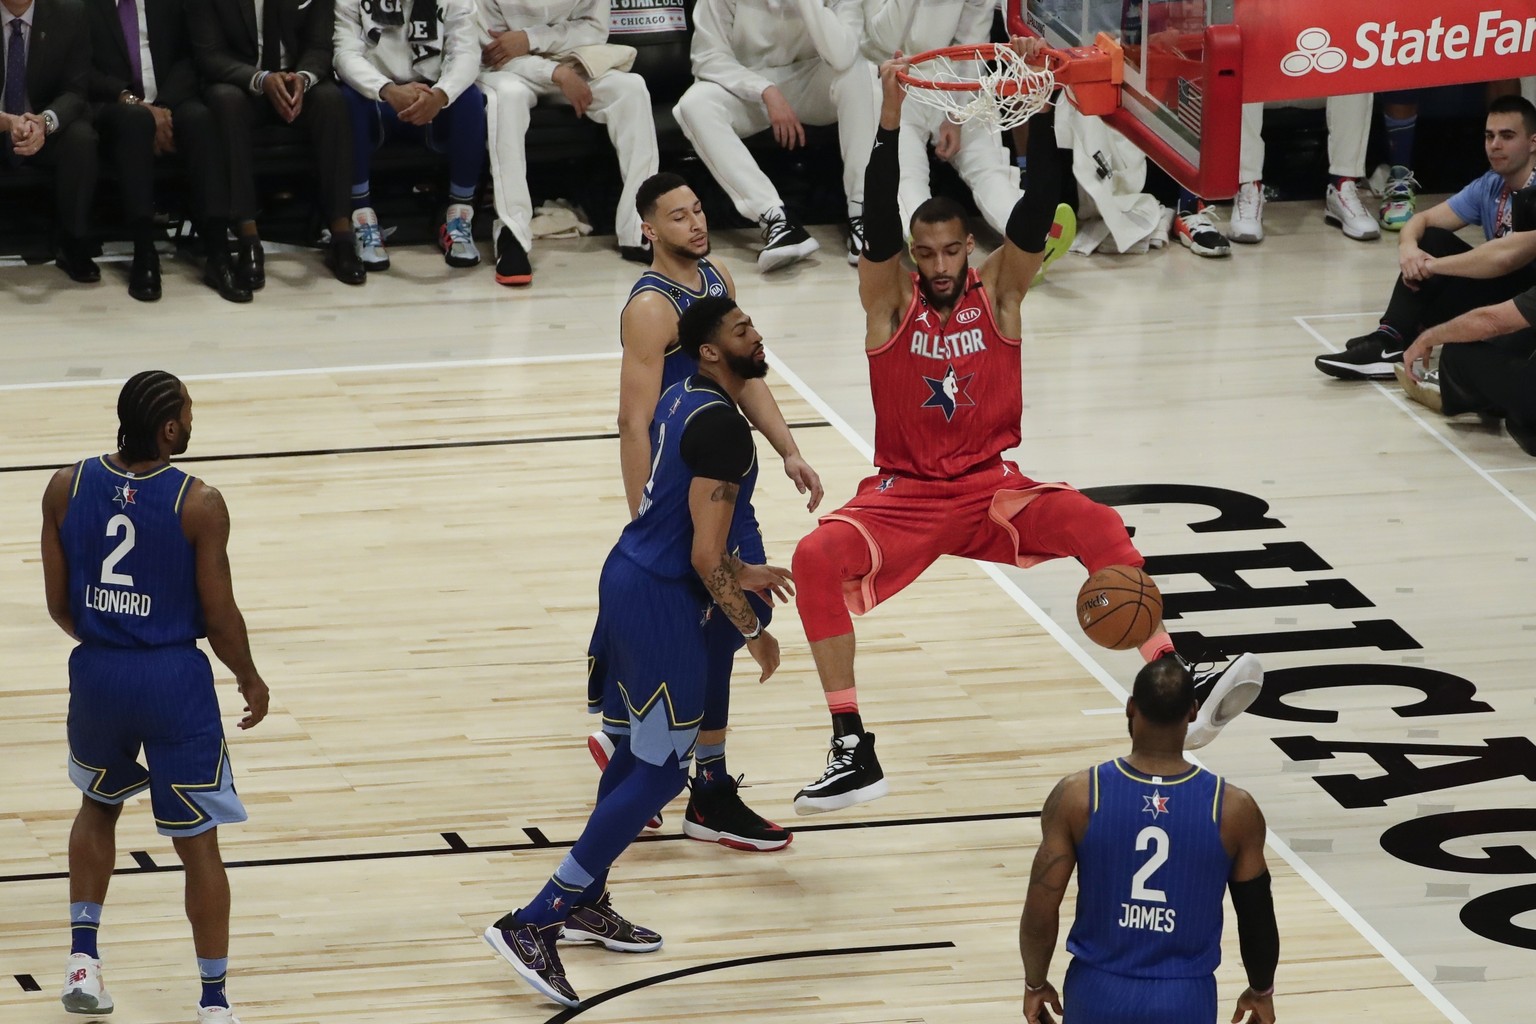 Rudy Gobert of the Utah Jazz dunks during the second half of the NBA All-Star basketball game Sunday, Feb. 16, 2020, in Chicago. (AP Photo/David Banks)